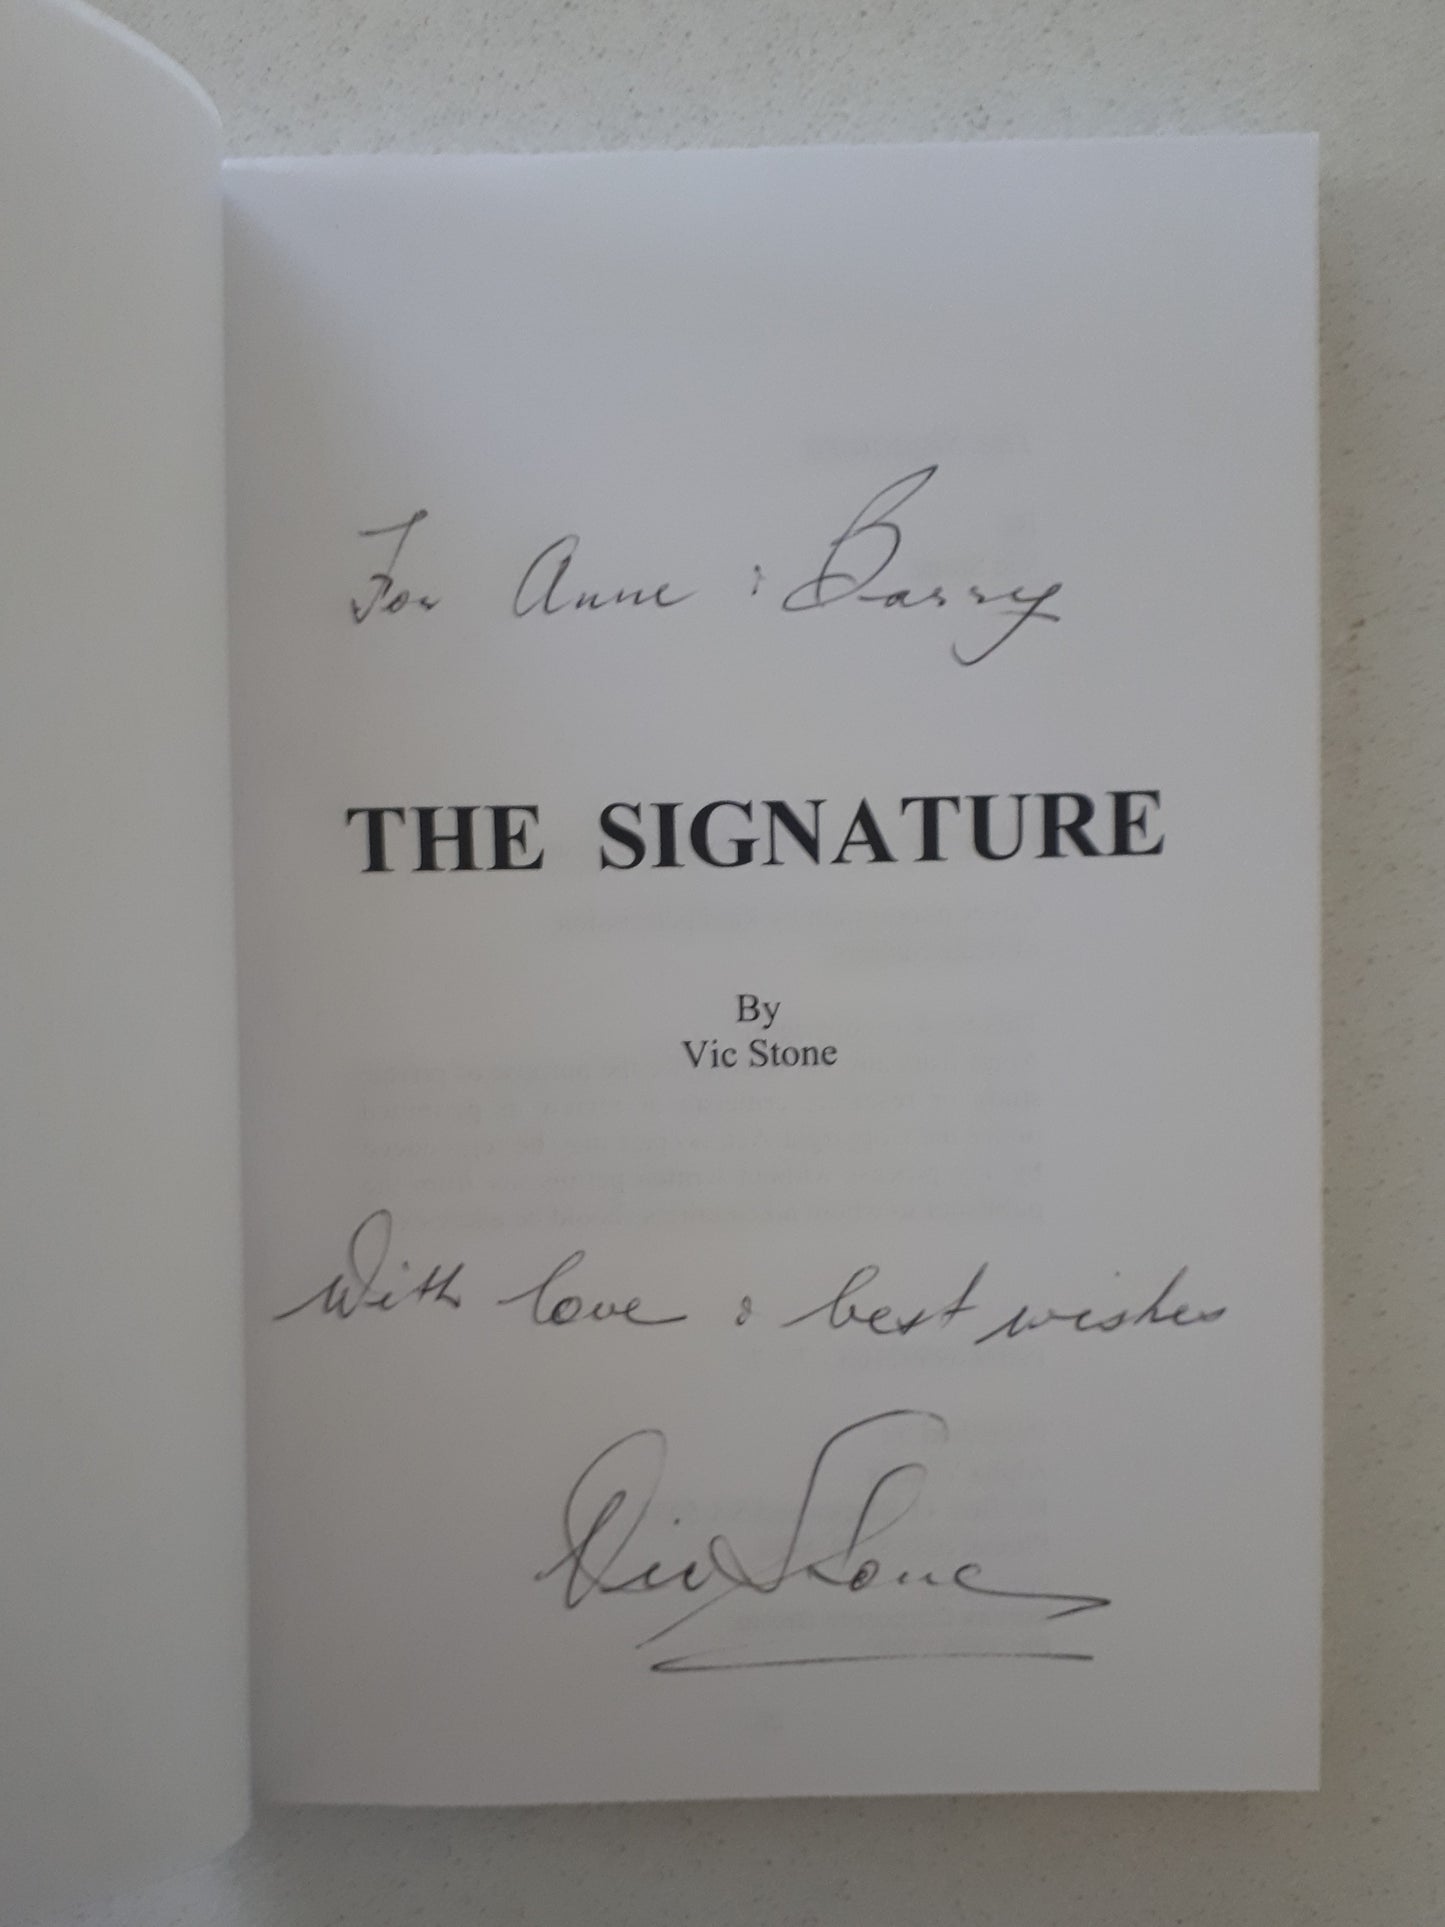 The Signature by Vic Stone